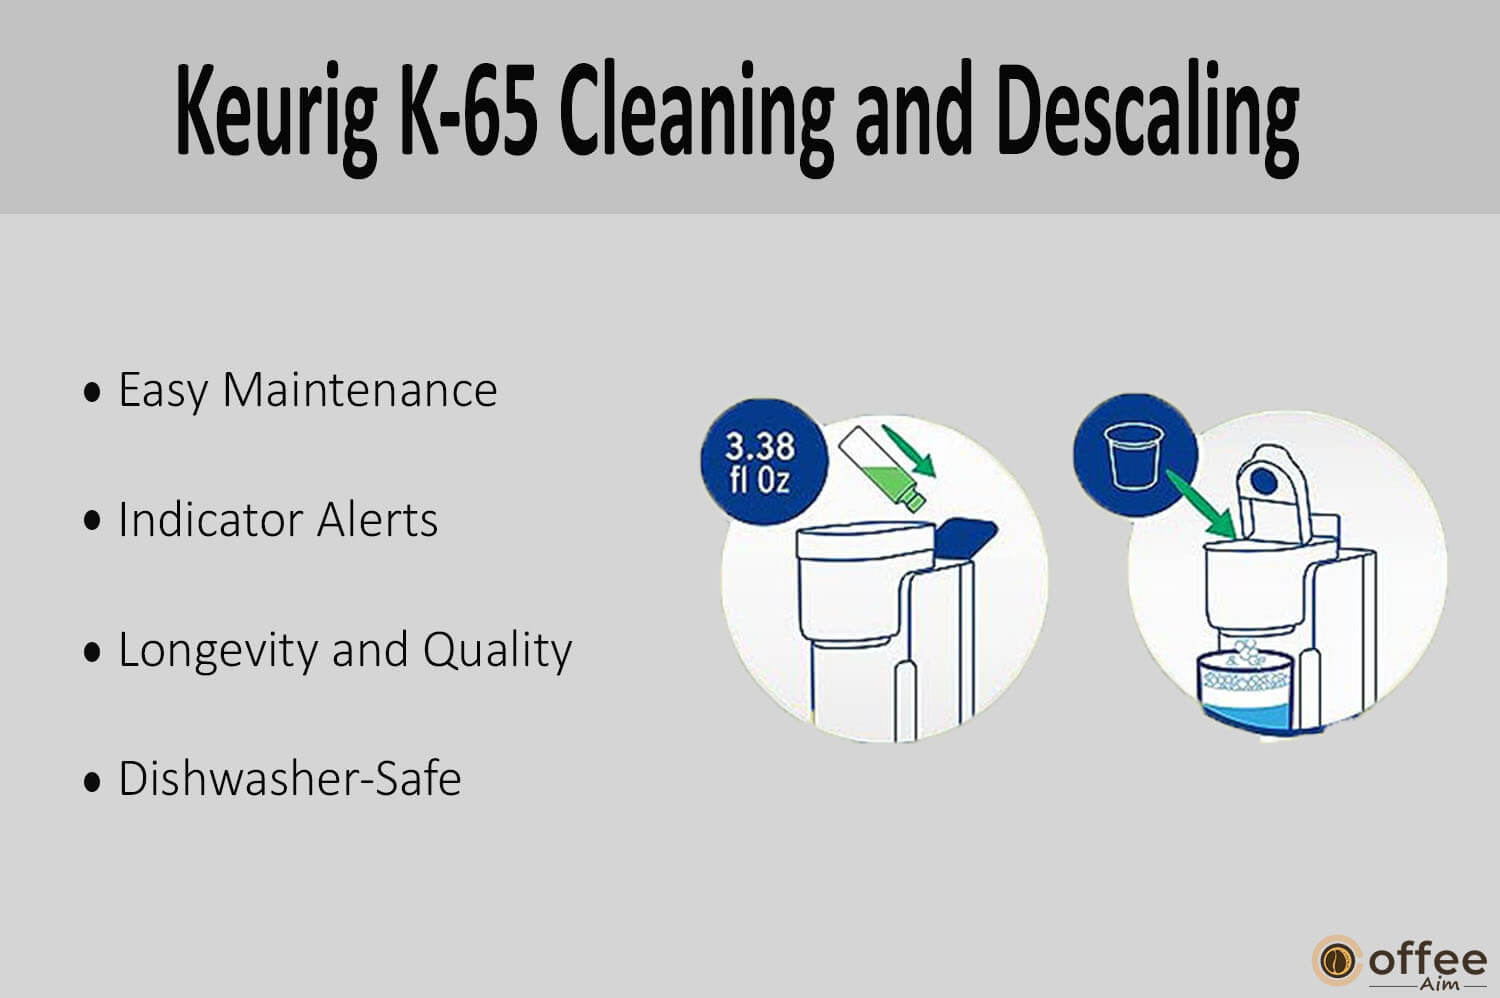 "The image offers a clear depiction of the cleaning and descaling processes for the Keurig K-65 machine, complementing our in-depth Keurig K-65 review and ensuring readers understand its maintenance requirements."